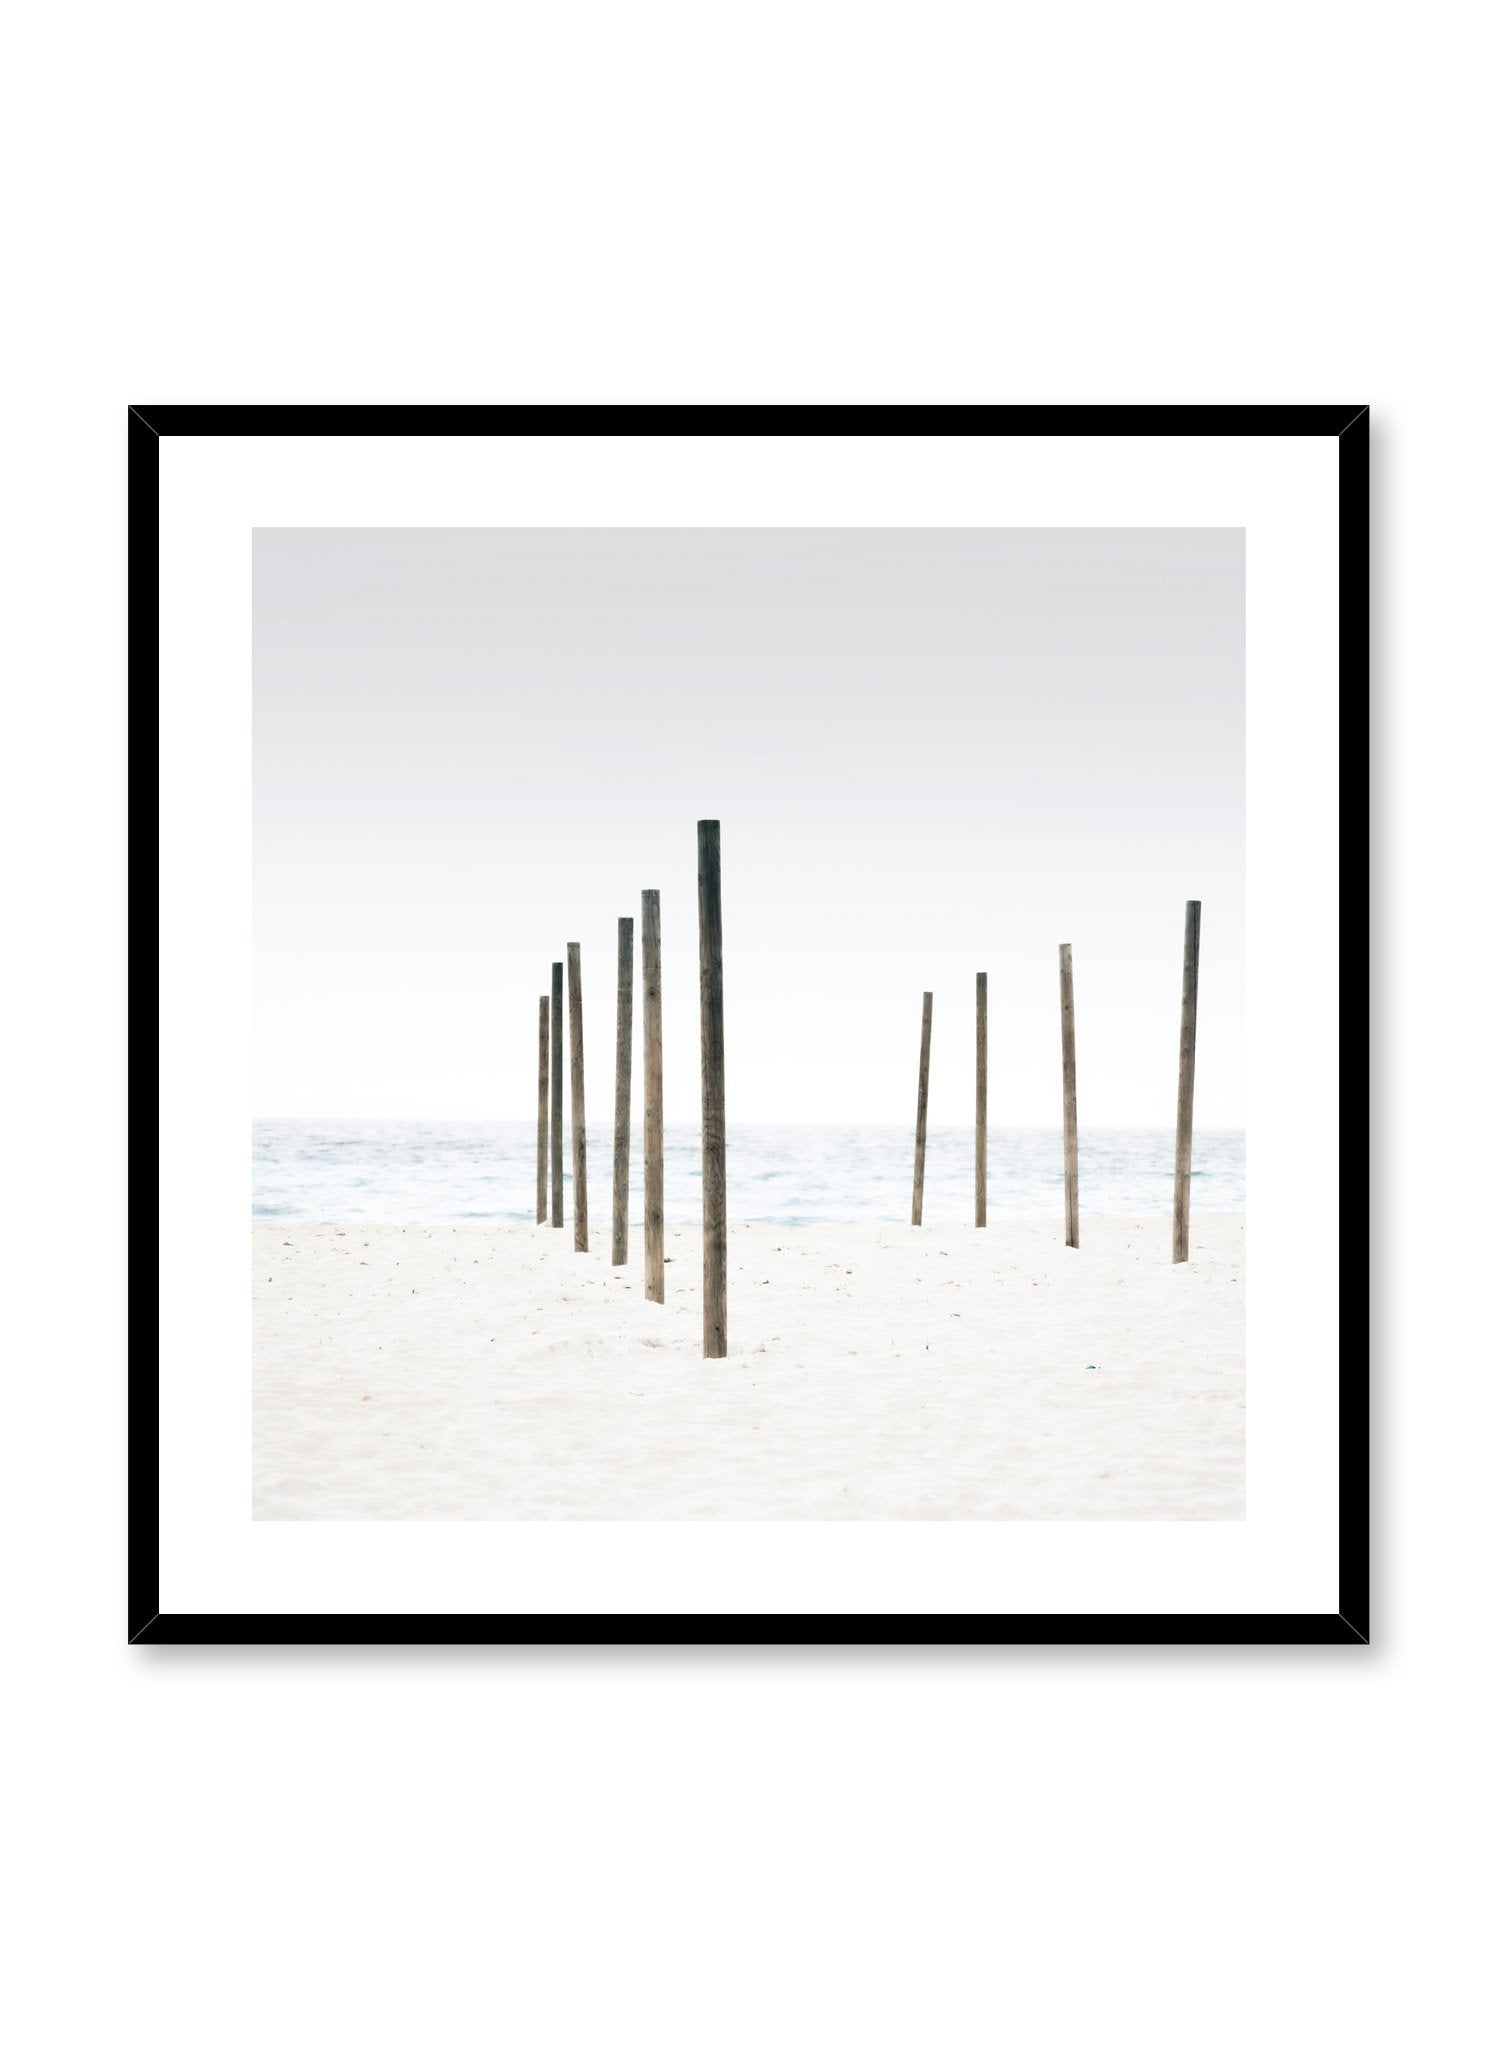 Minimalist design photography poster of Sandy Beach by Love Warriors Creative Studio - Buy at Opposite Wall